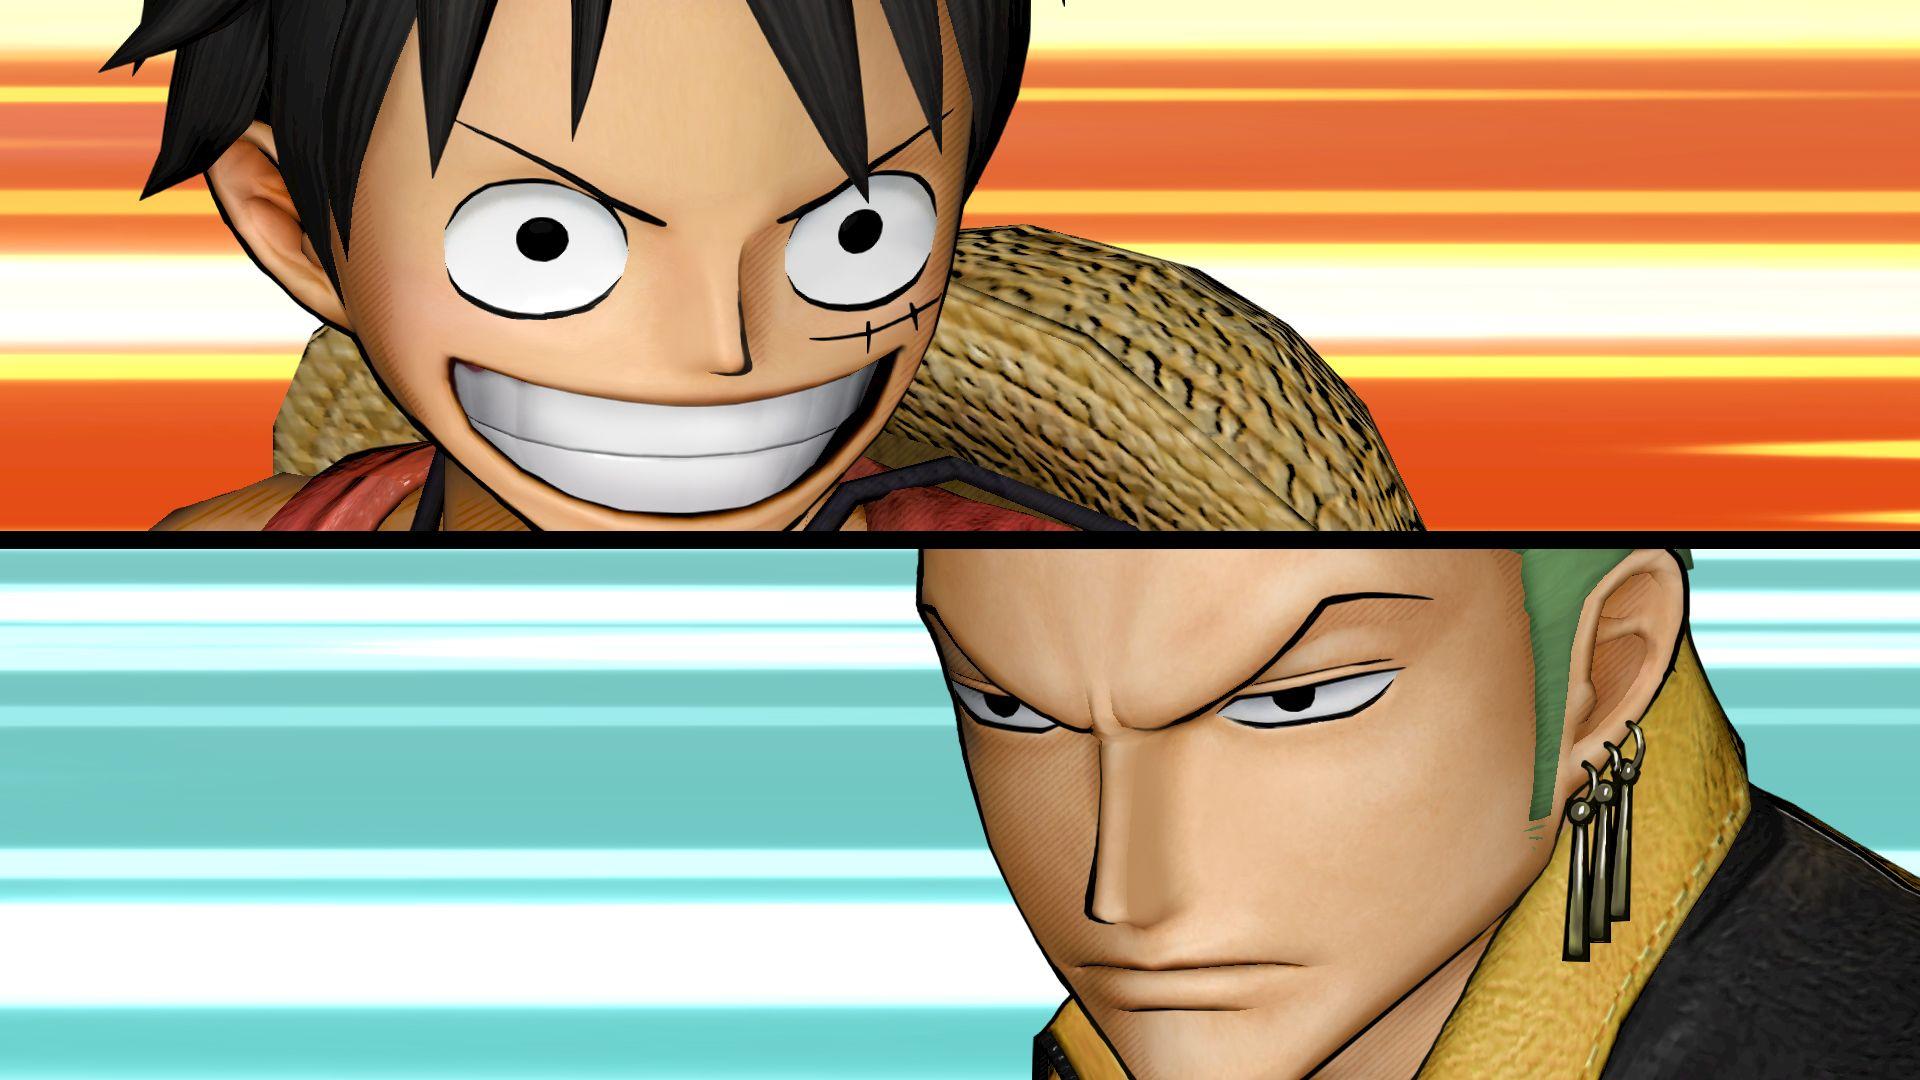 New One Piece: Pirate Warriors 3 Screenshots and Character Artworks